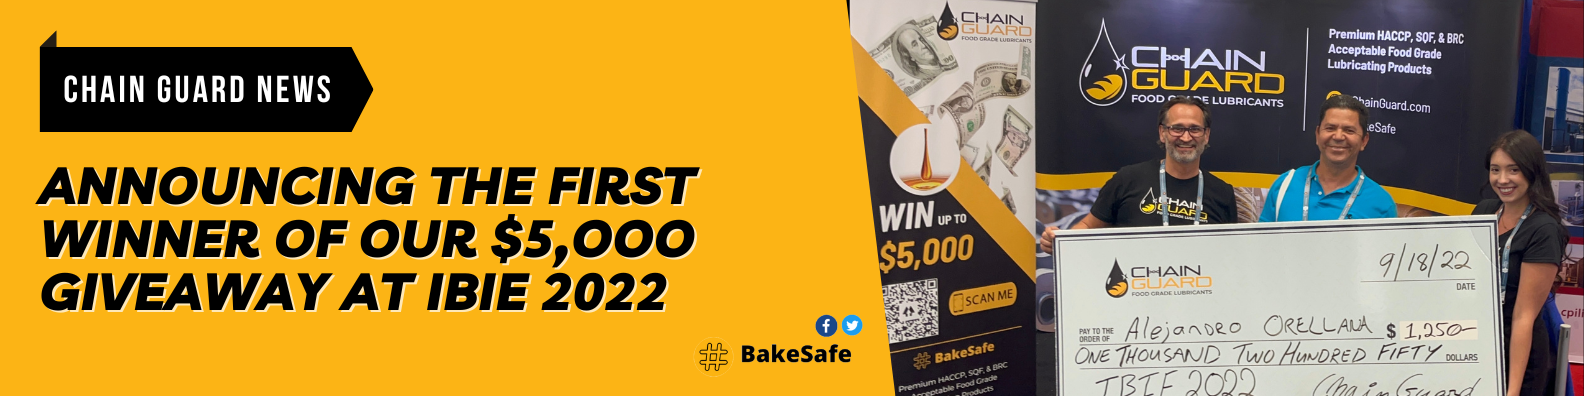 Announcing The First Winner Of Our $5,000 Giveaway At IBIE